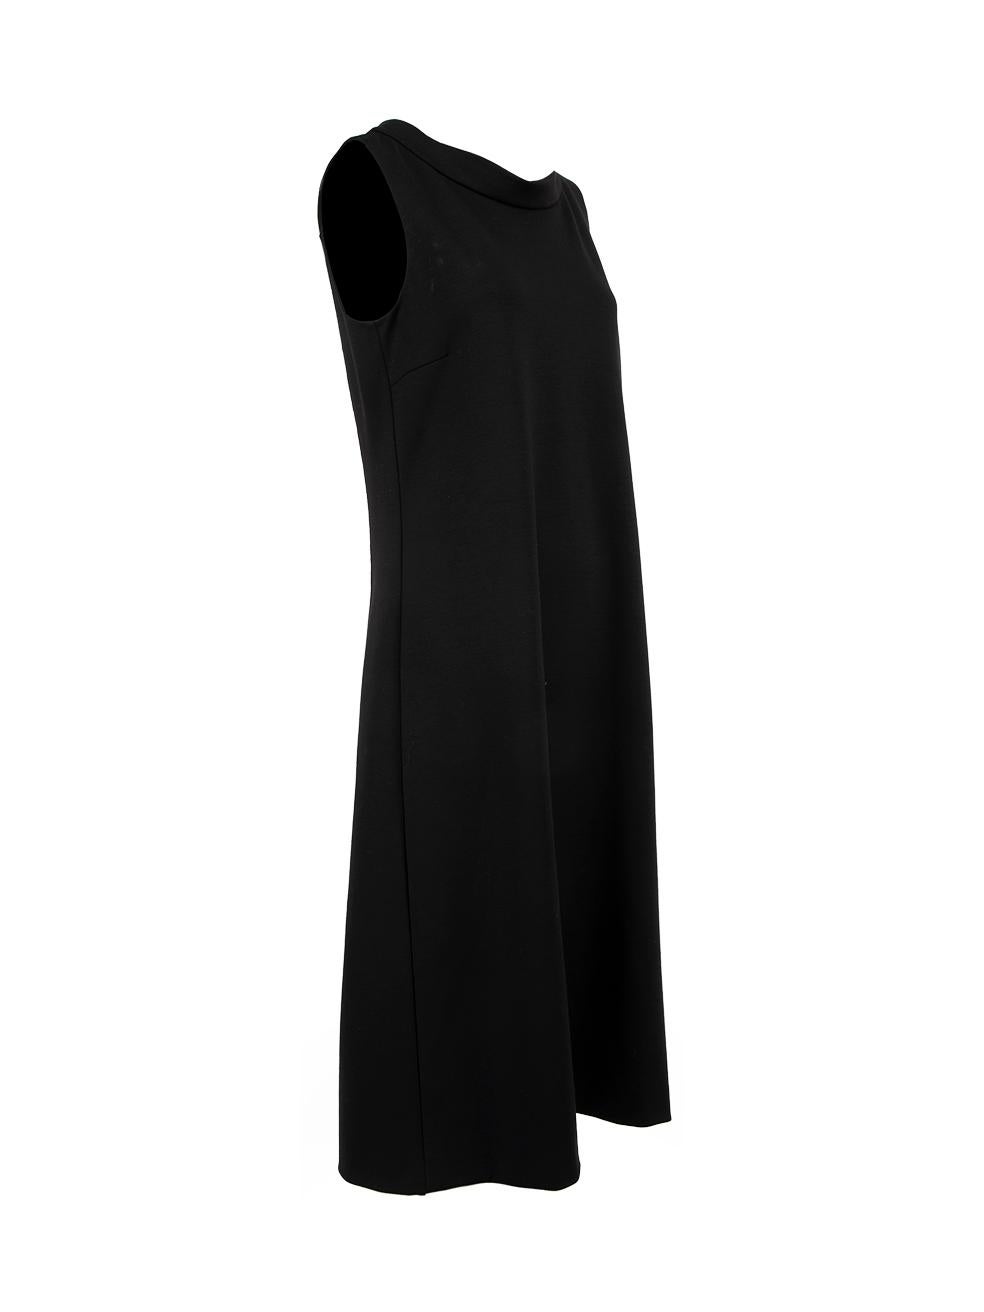 CONDITION is Very good. Hardly any visible wear to dress is evident on this used Yves Saint Laurent designer resale item. Details Autumn 2010 Black Wool Shift dress Midi length Sleeveless Boat neckline Back zip fastening Made in Italy Composition